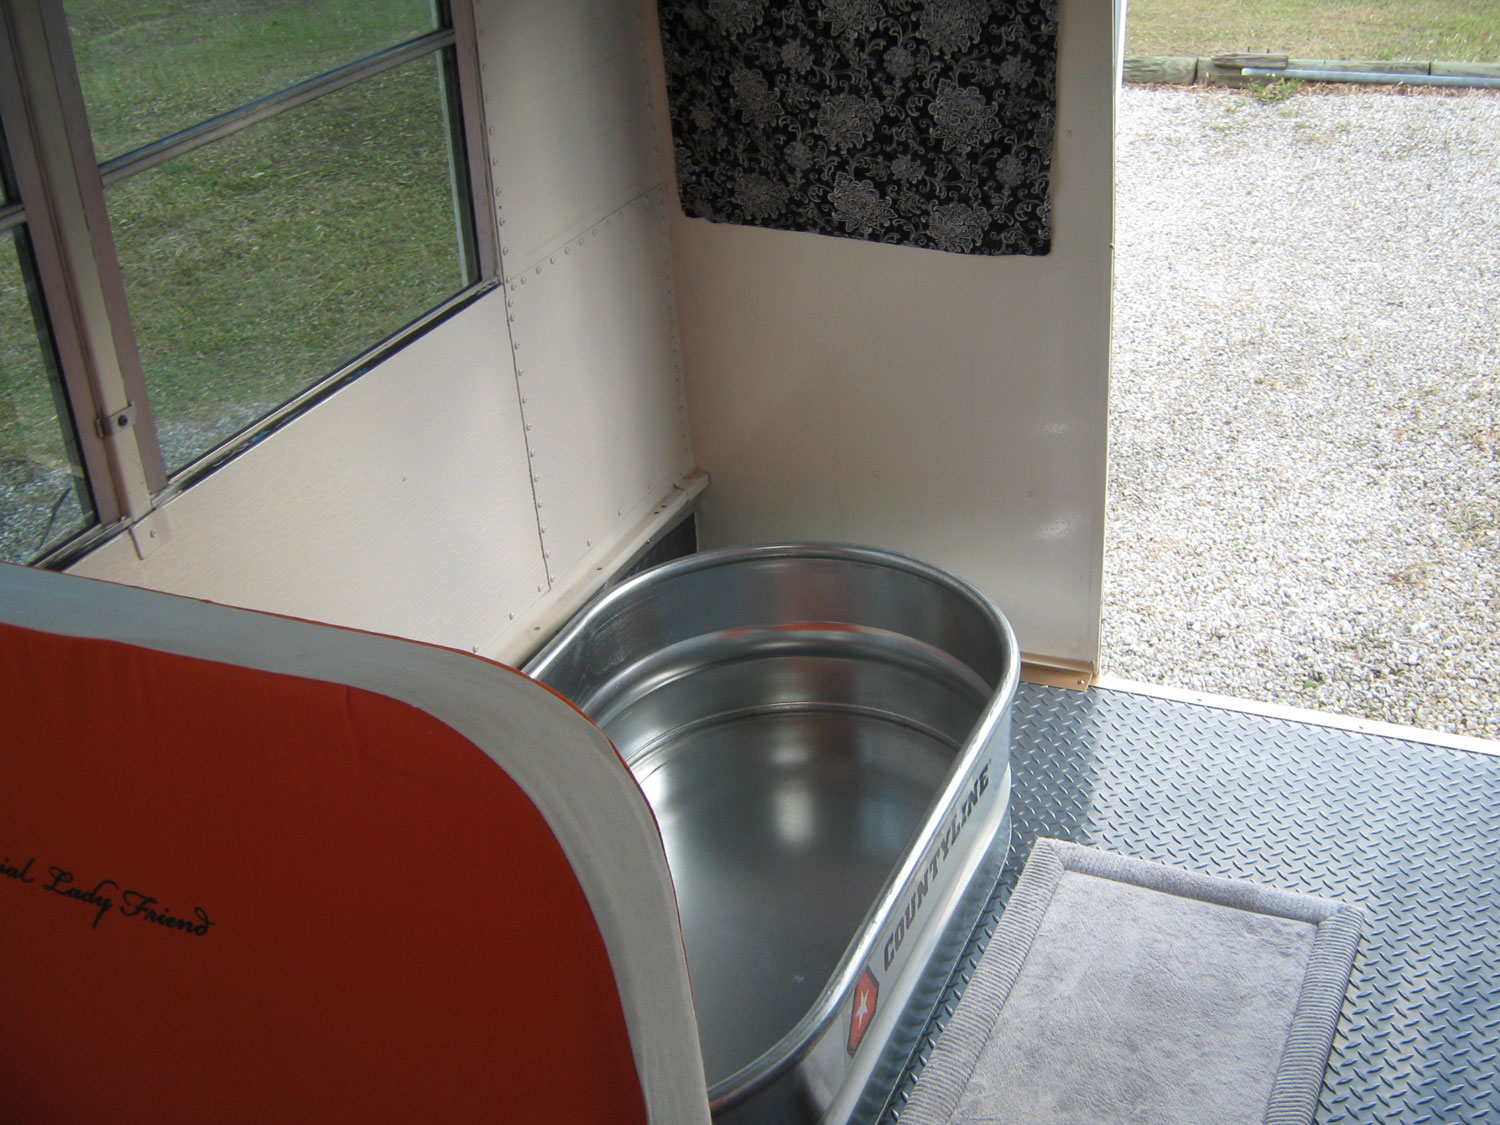 Our Skoolie has a very simple and easy to install and use shower.